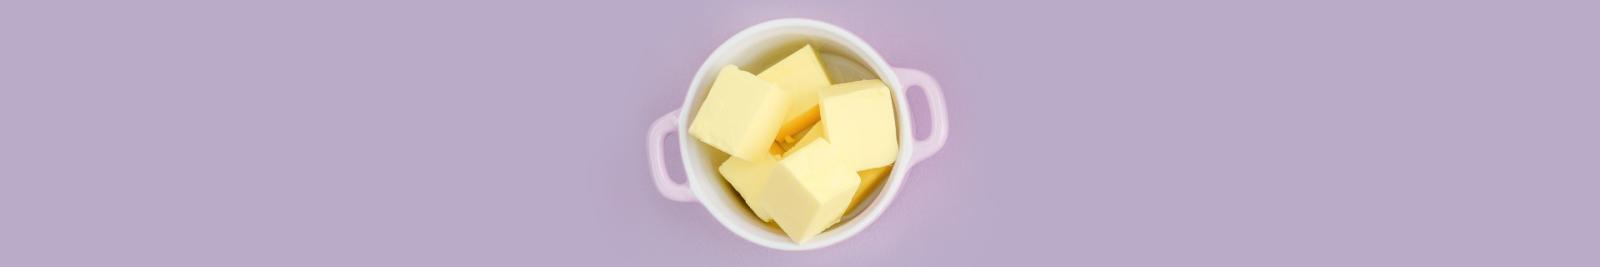 image of butter